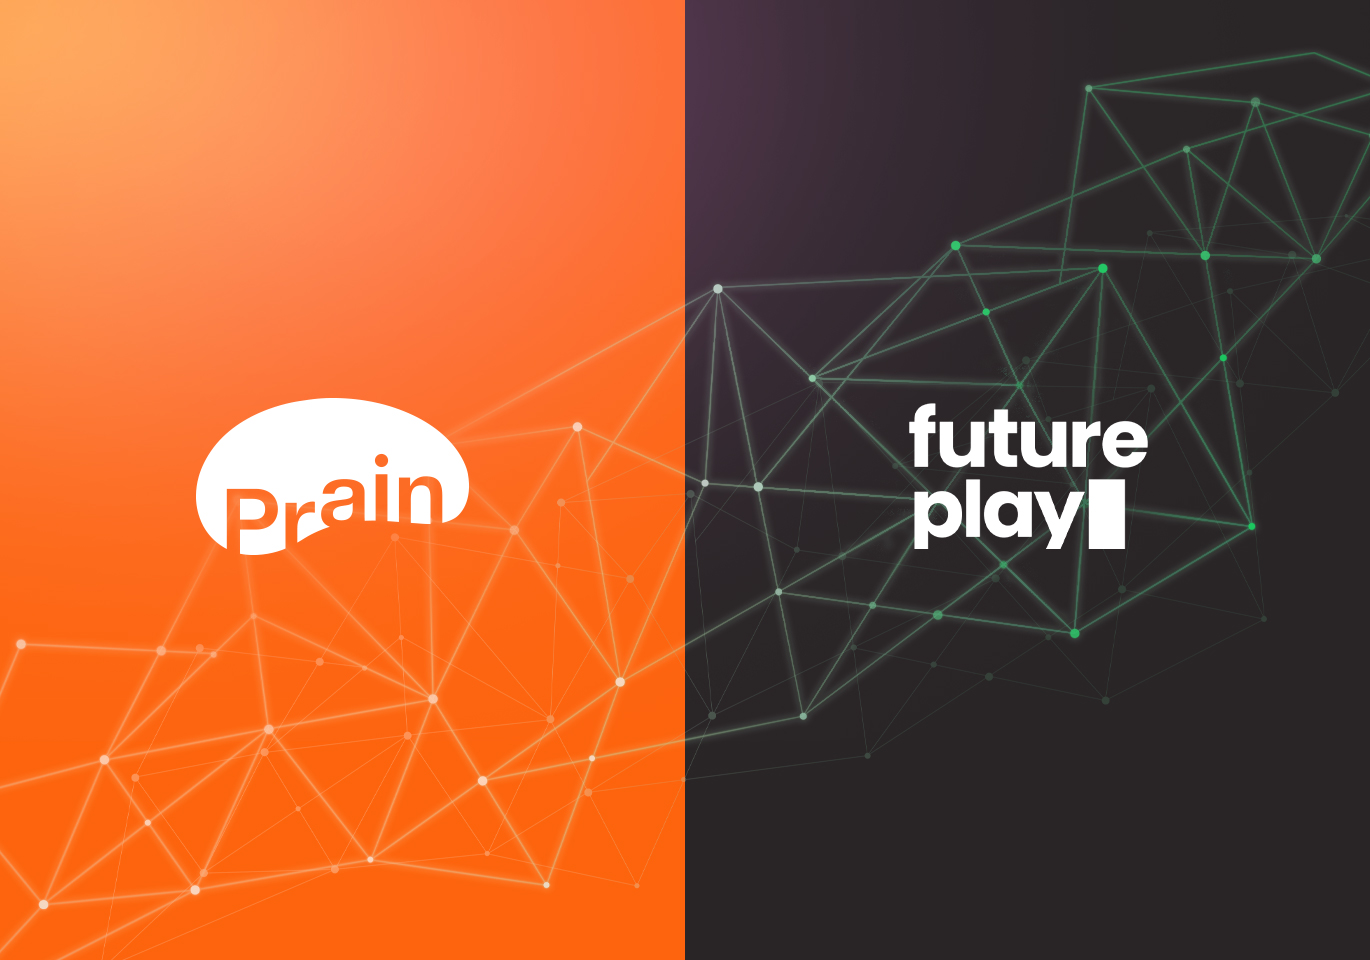 Prain Global Inks MOU with Future Play for Startup Support